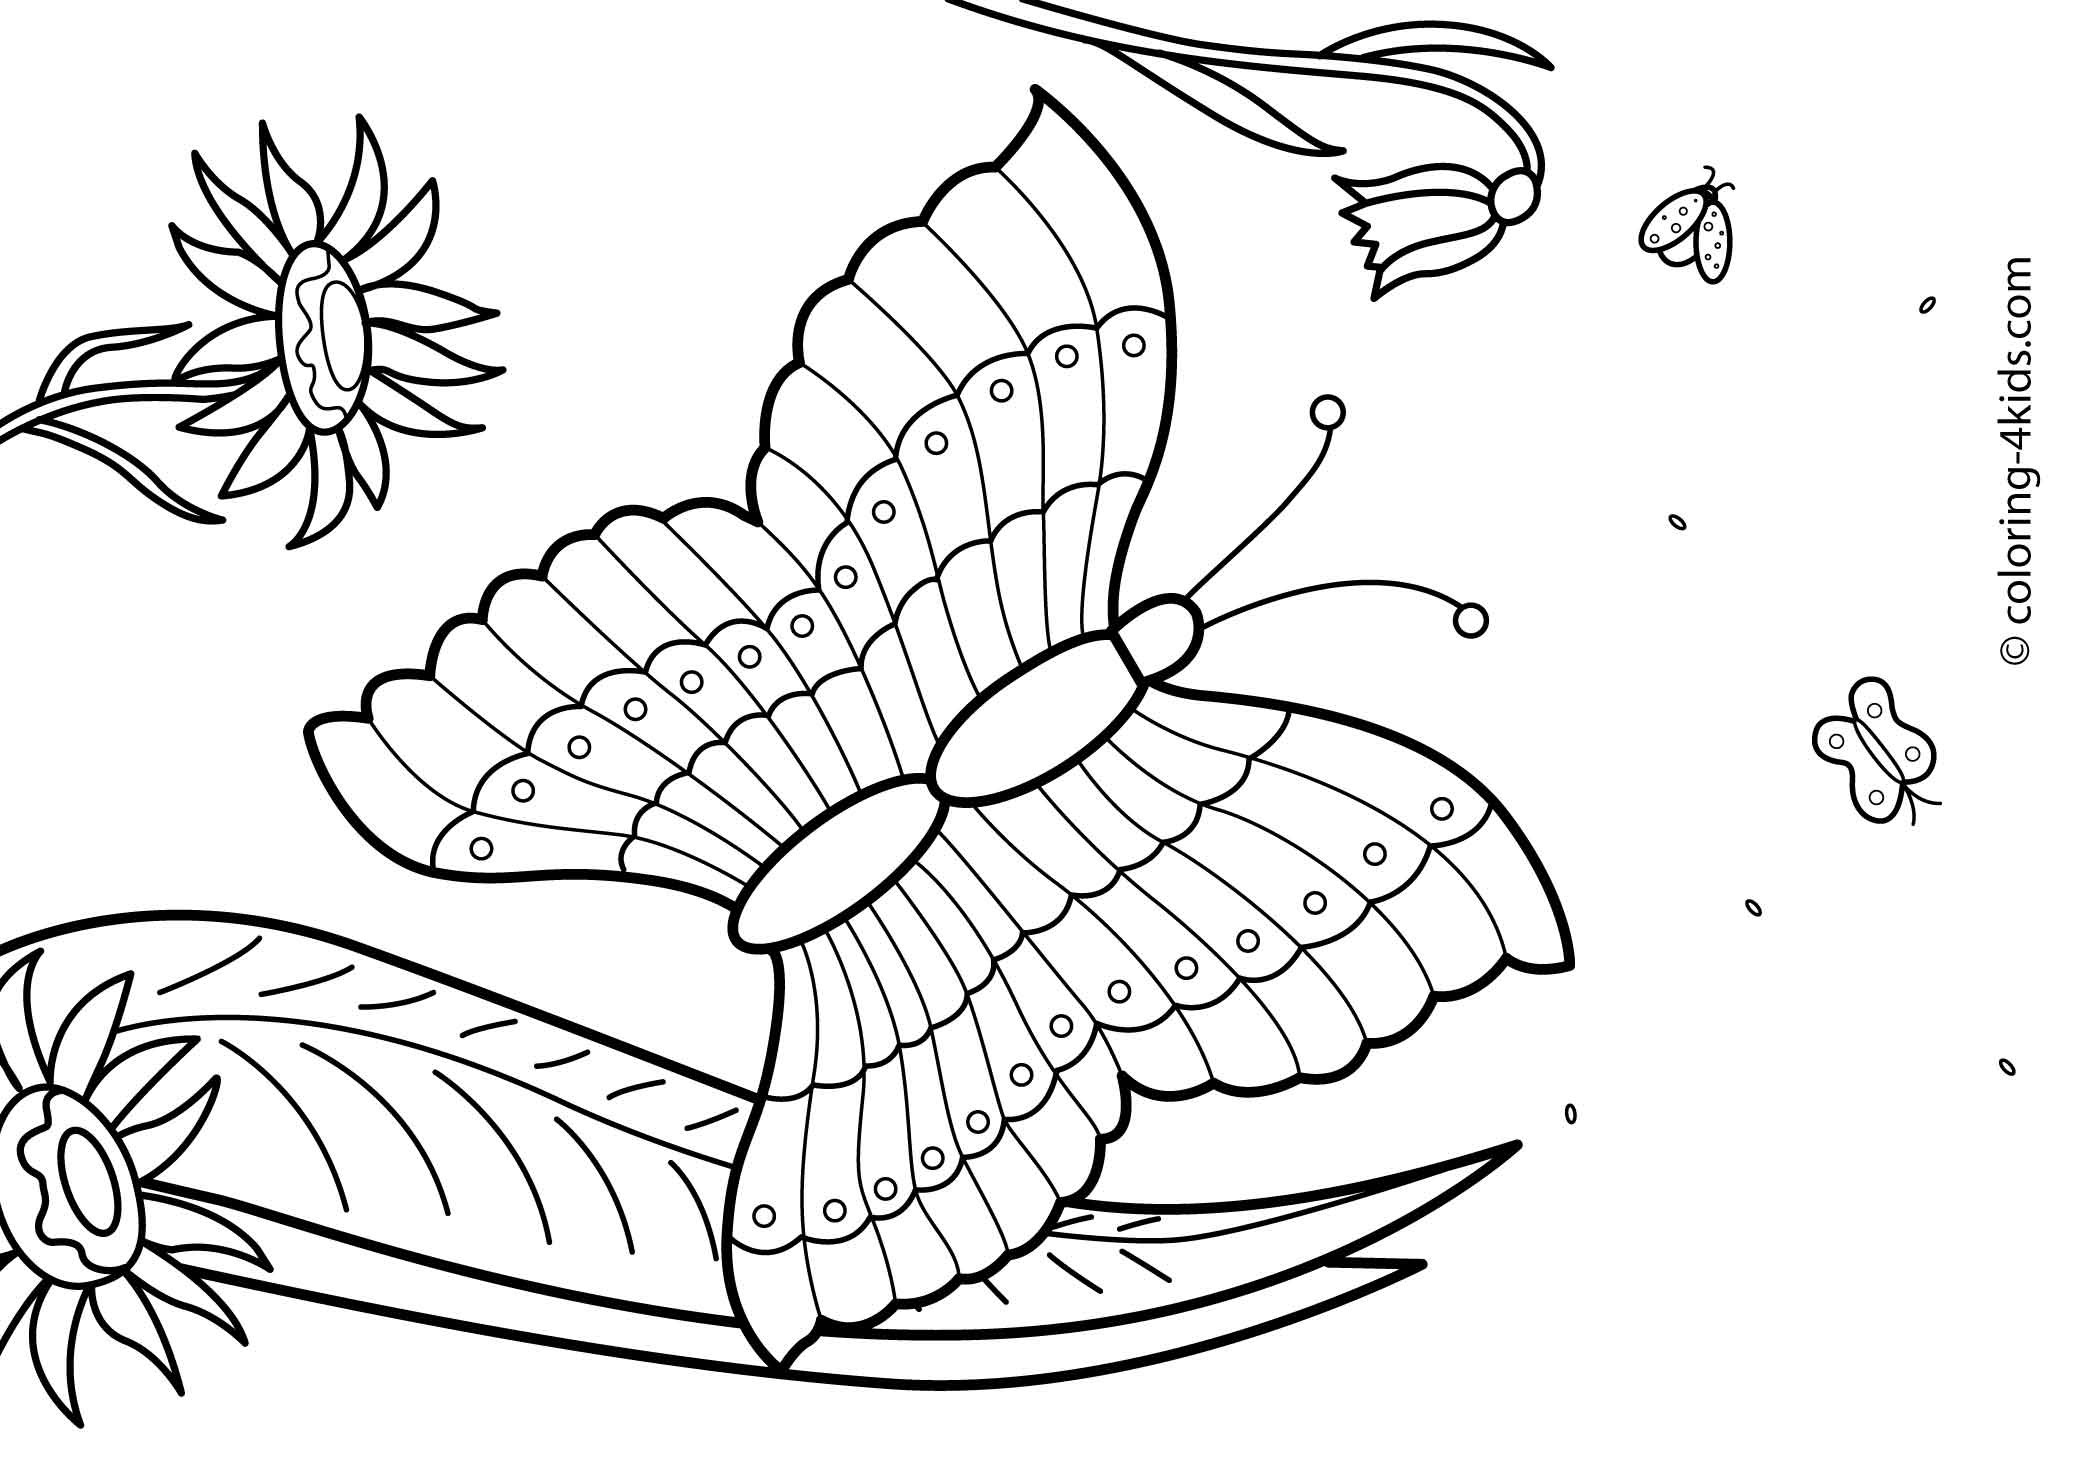 Kids Coloring Pages Summer
 27 Summer season coloring pages part 2